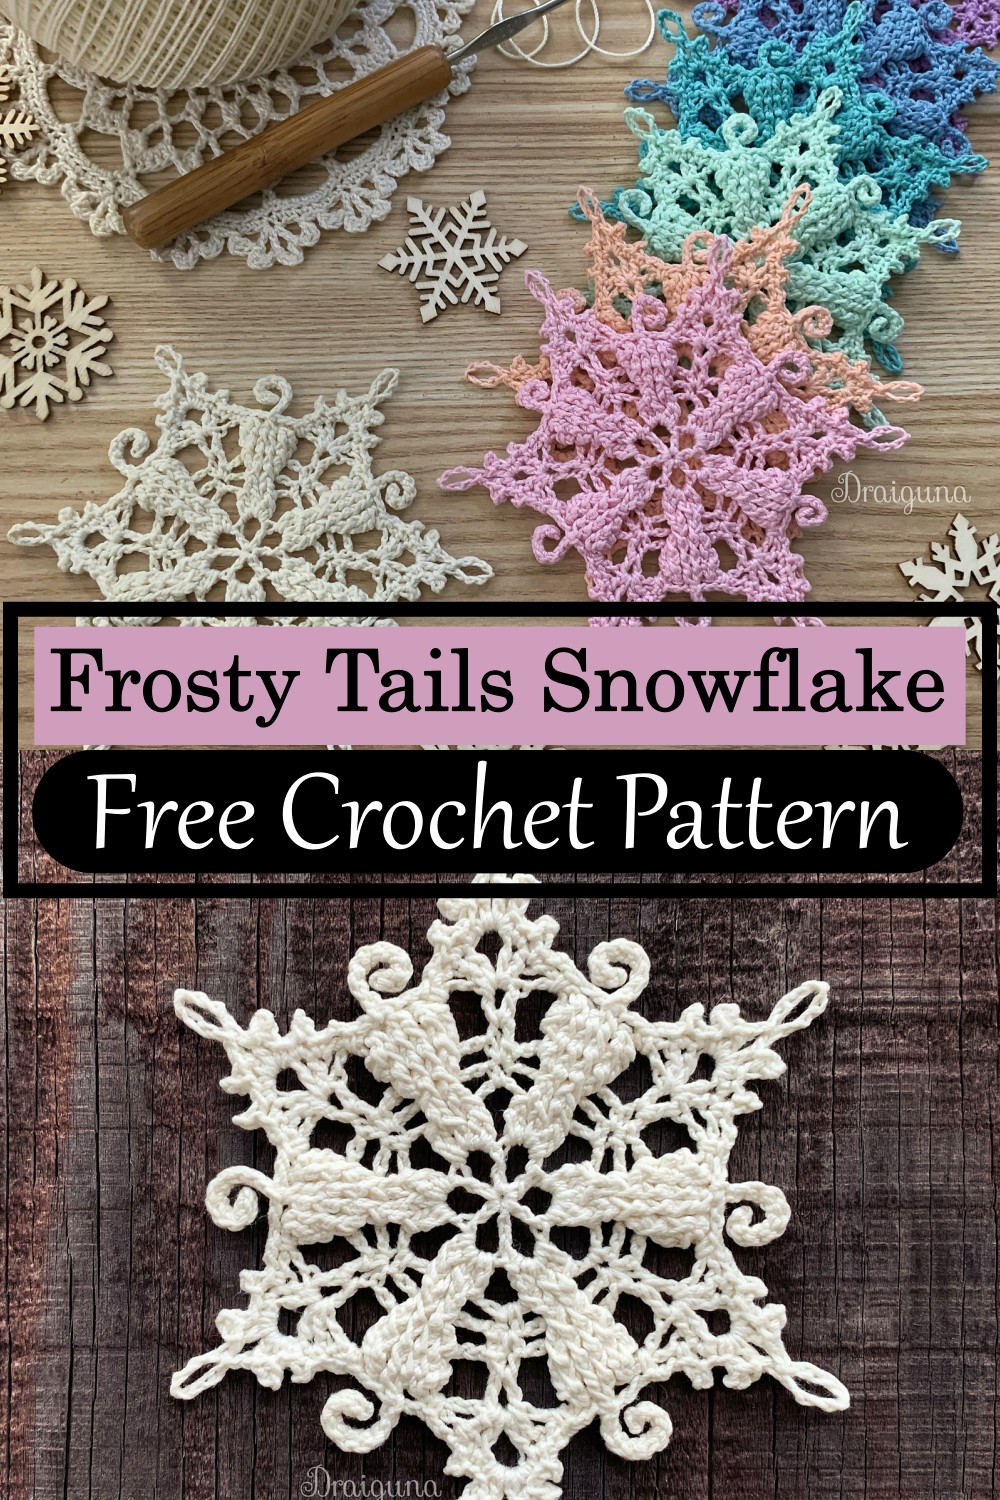 Frosty Tails Snowflake